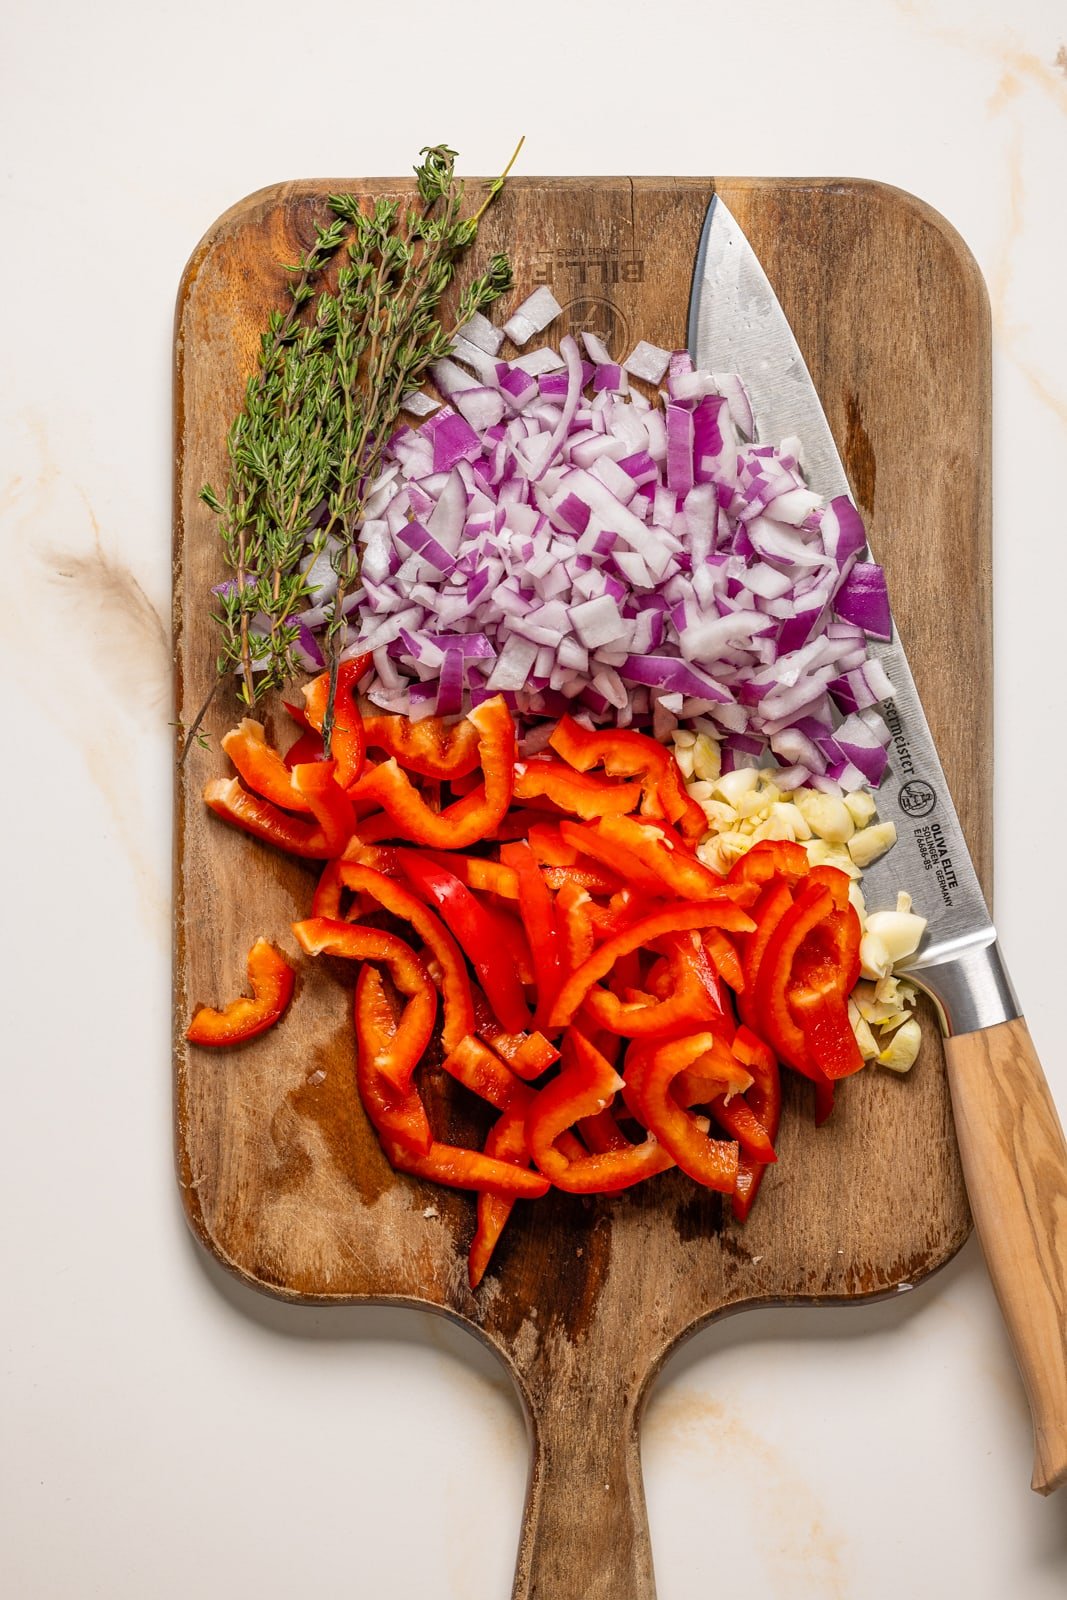 Bell peppers, onions, garlic, and thyme chopped on a cutting board with a knife.